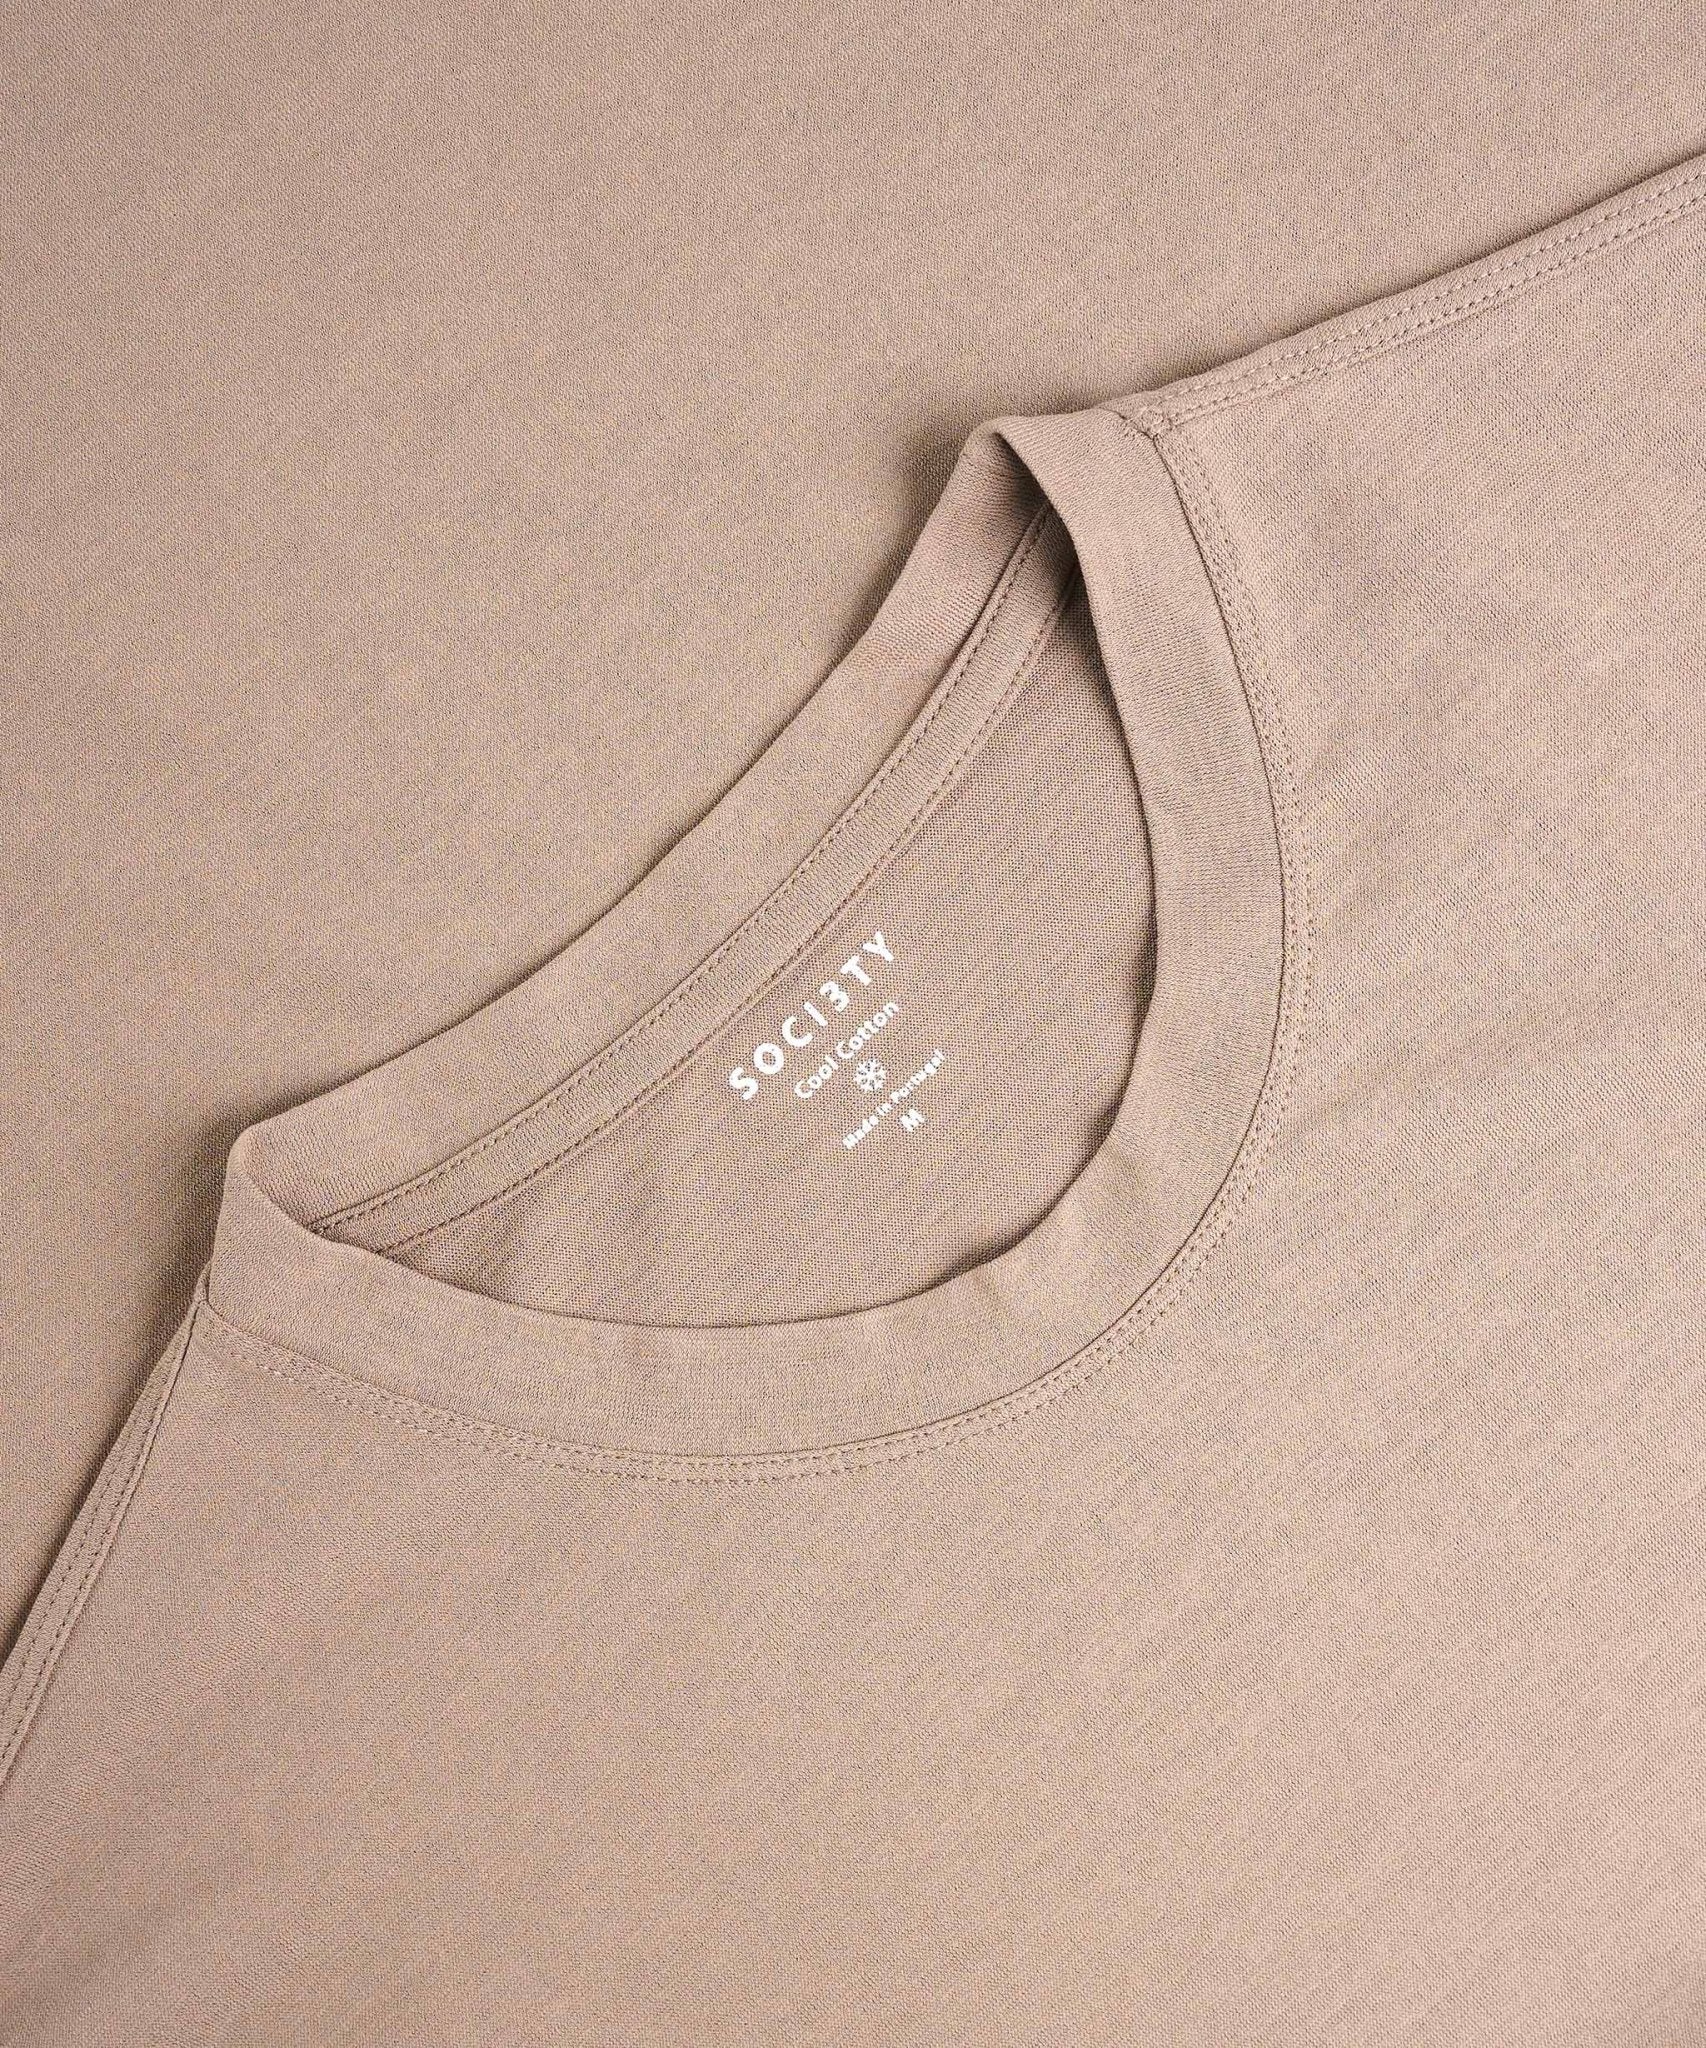 SOCI3TY T-shirt cool cotton beige - The Society Shop